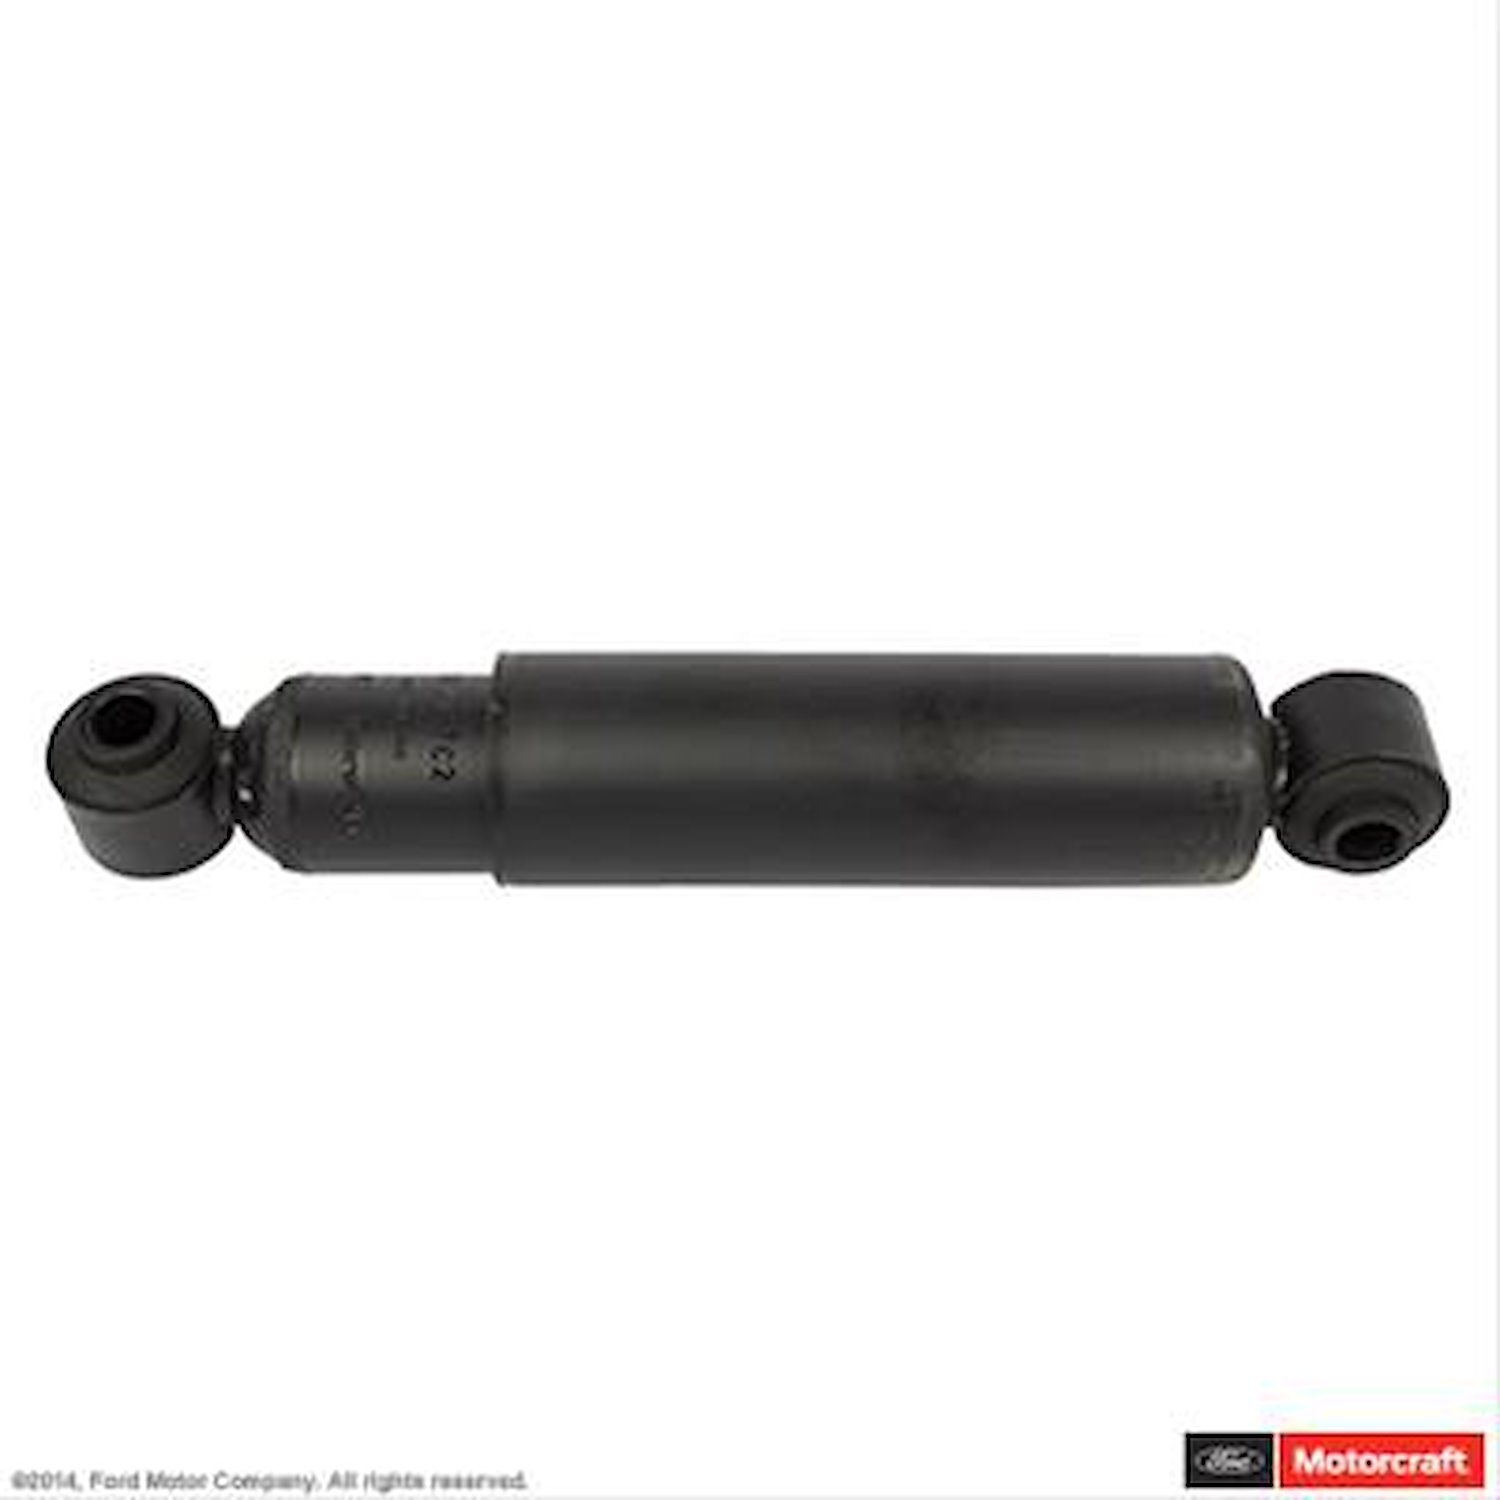 Shock Absorber Assembly for 2000-2015 Ford F-650, F-750 Truck [Front Driver or Passenger Side]